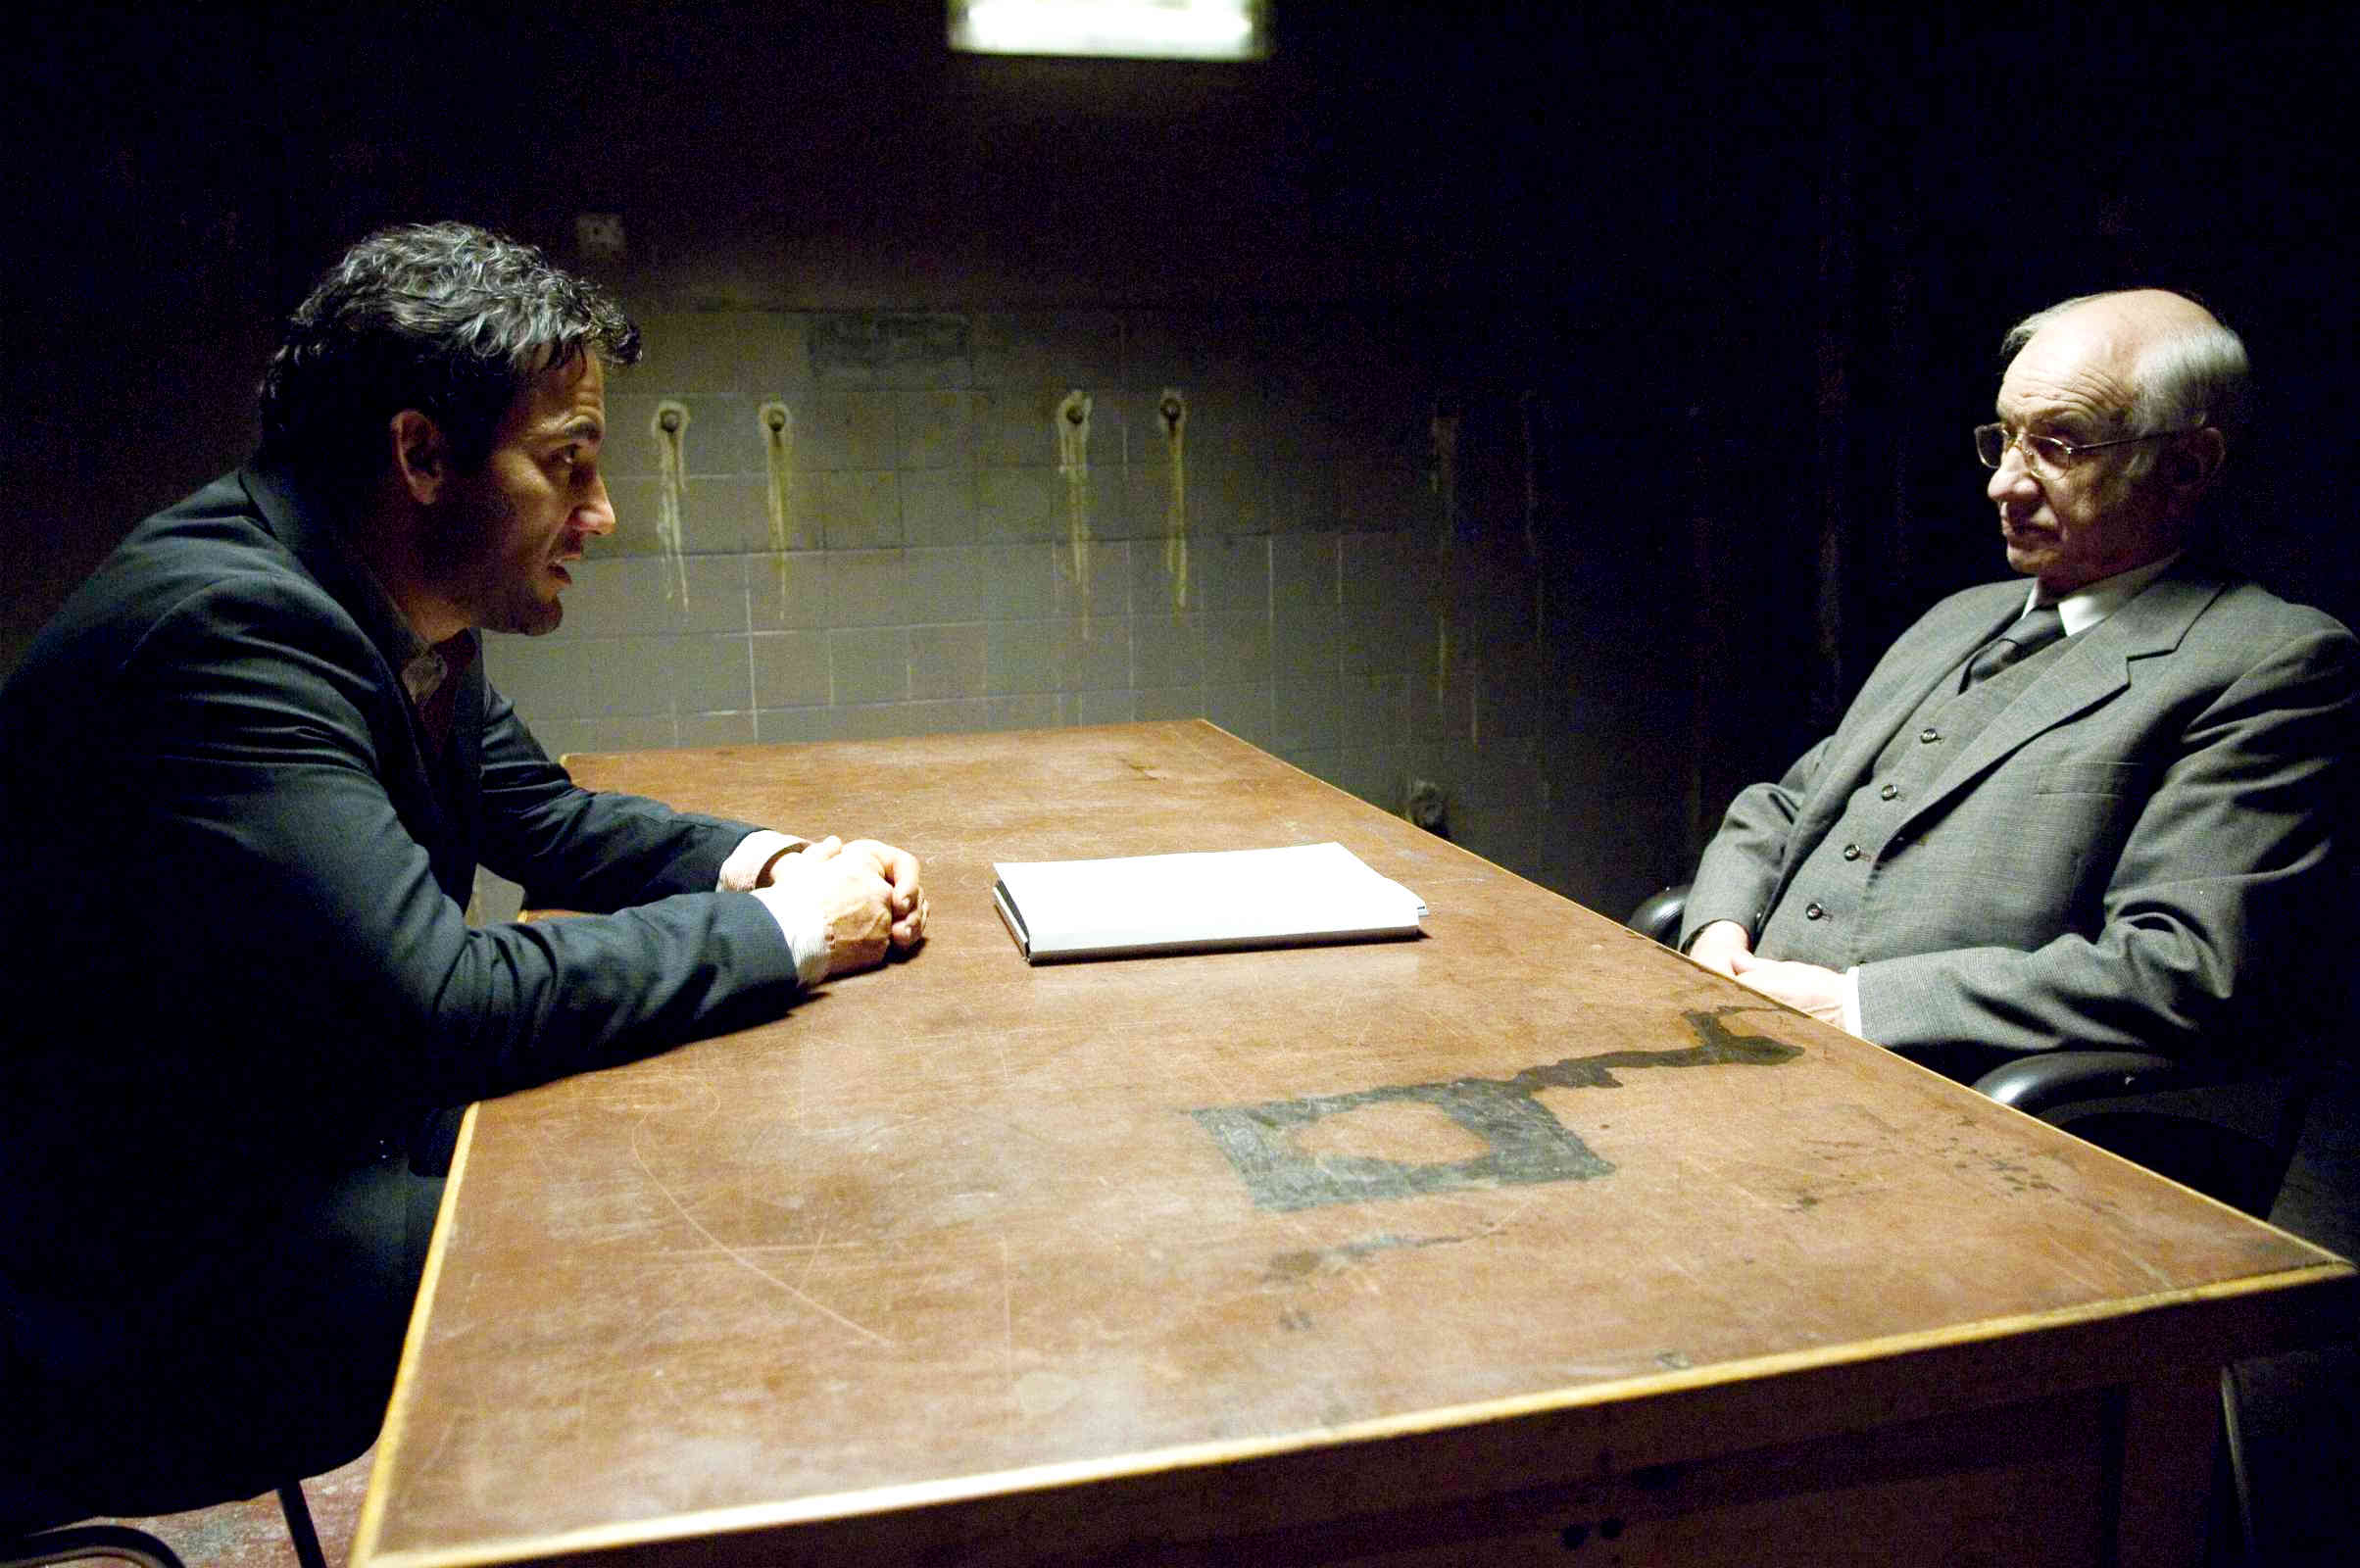 Clive Owen (Louis Salinger) and Armin Mueller-Stahl in Columbia Pictures' The International (2009). Photo credit by Jay Maidment.